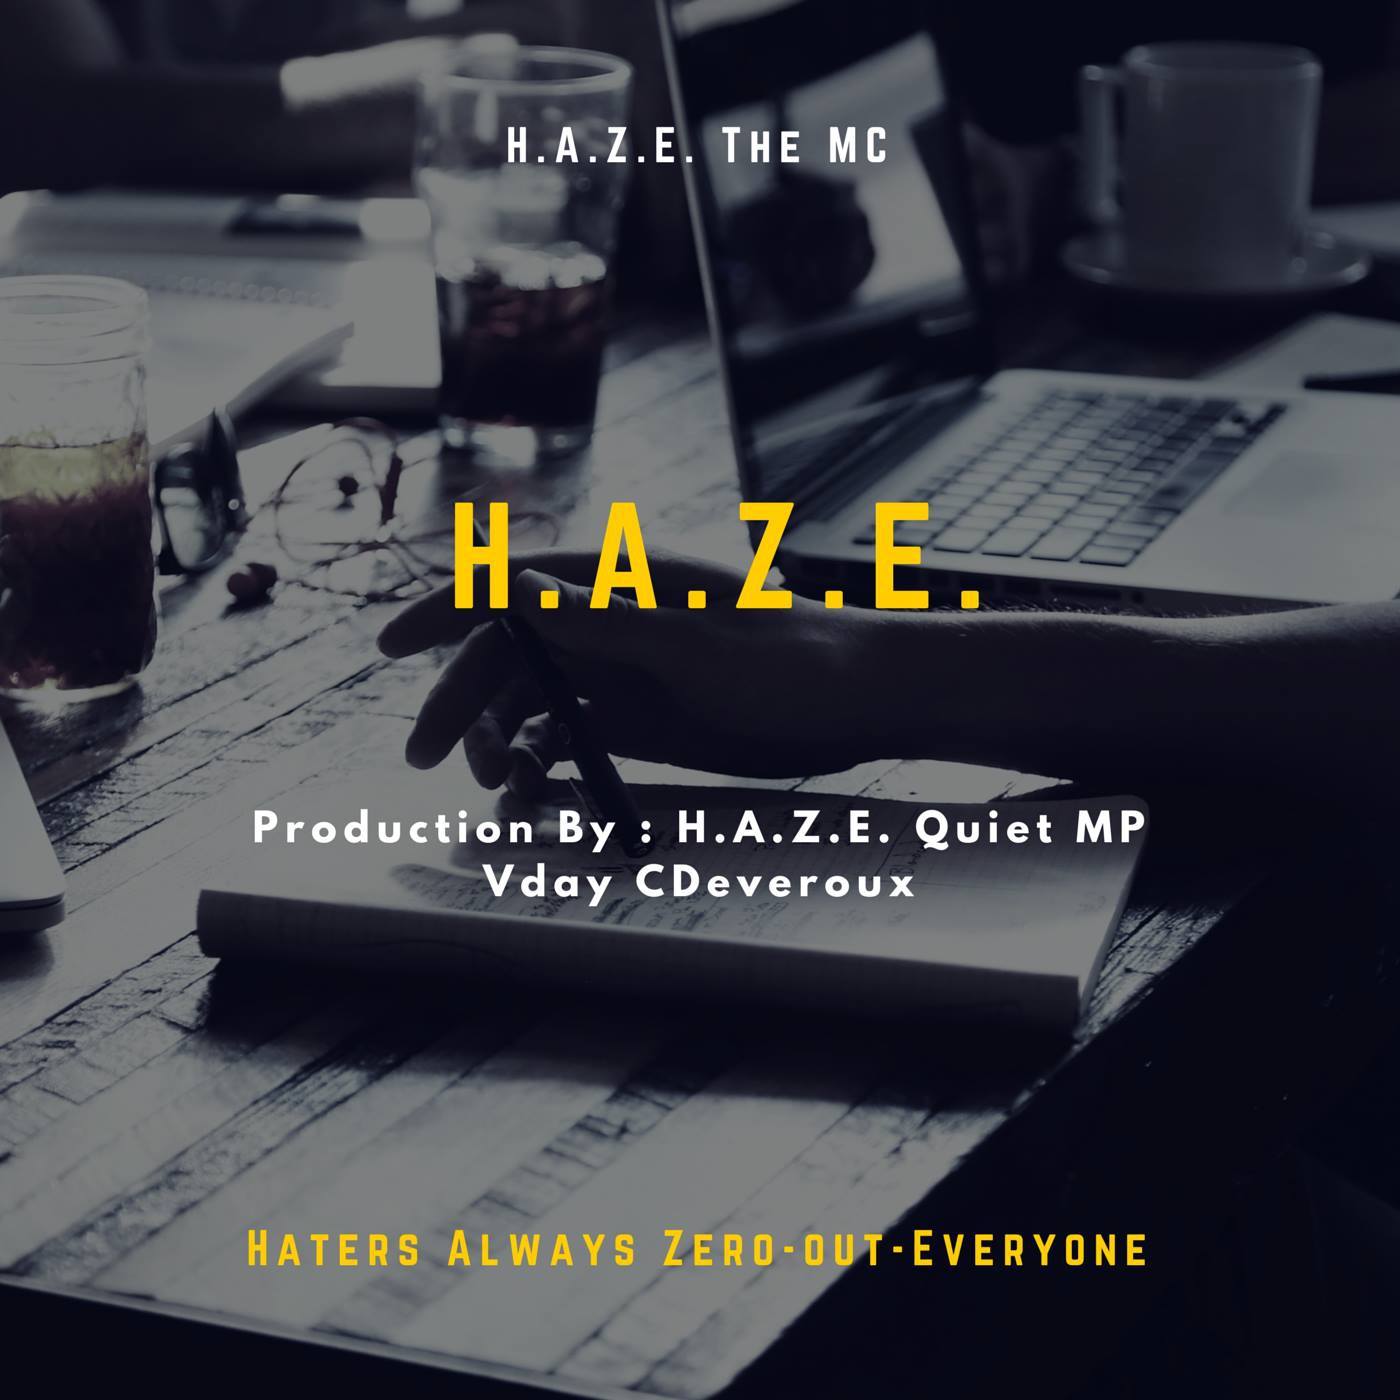  H.A.Z.E. The MC – H.A.Z.E. (Haters Always Zeroout Everyone) The EP